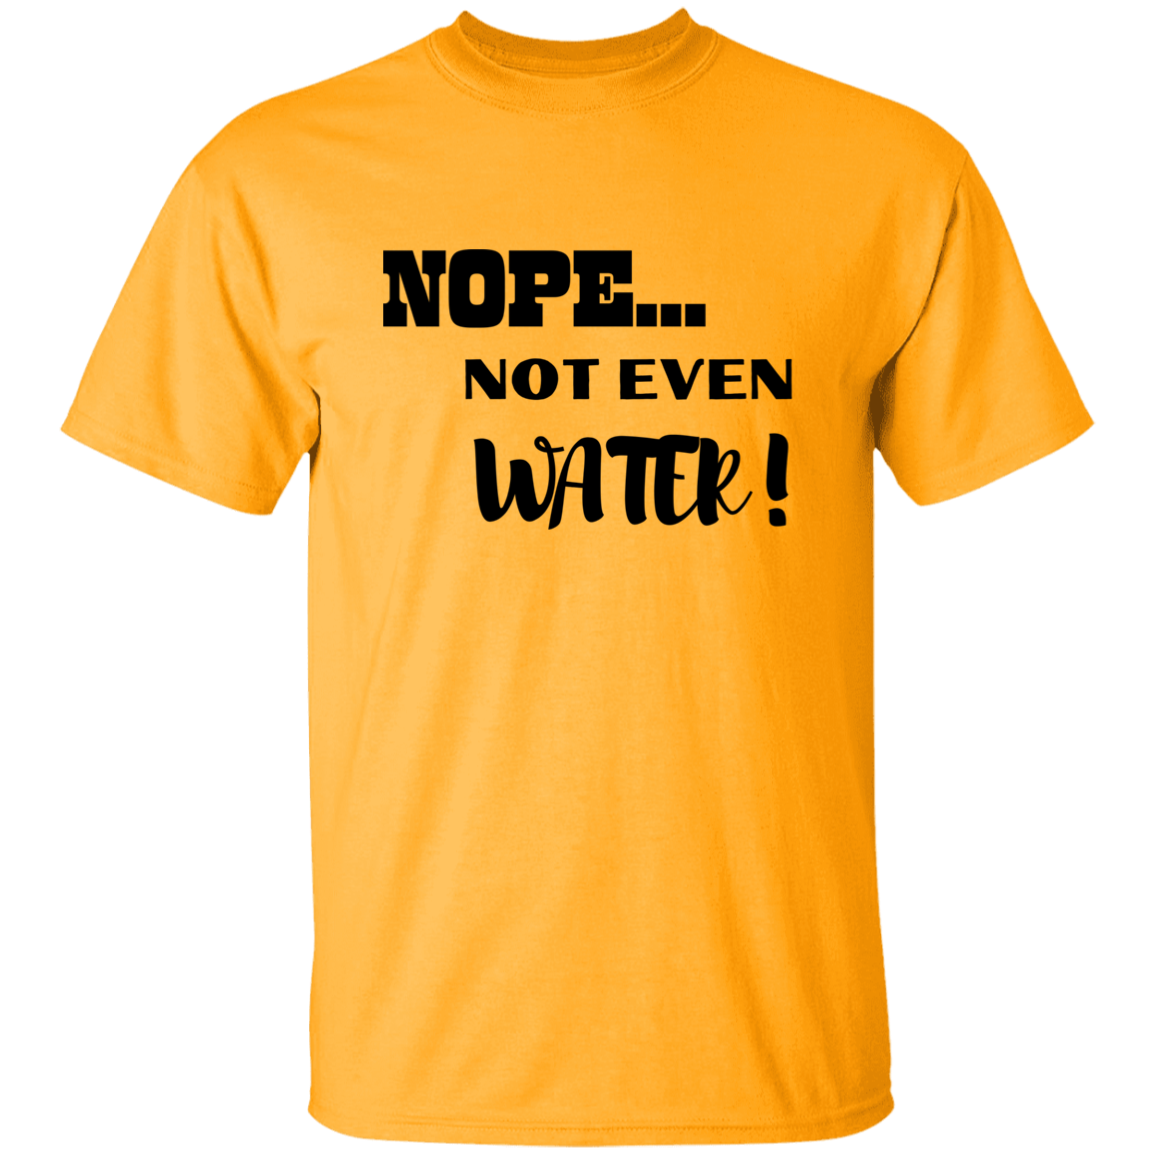 NOPE...NOT EVEN WATER!  T-Shirt (MORE COLOR OPTIONS)